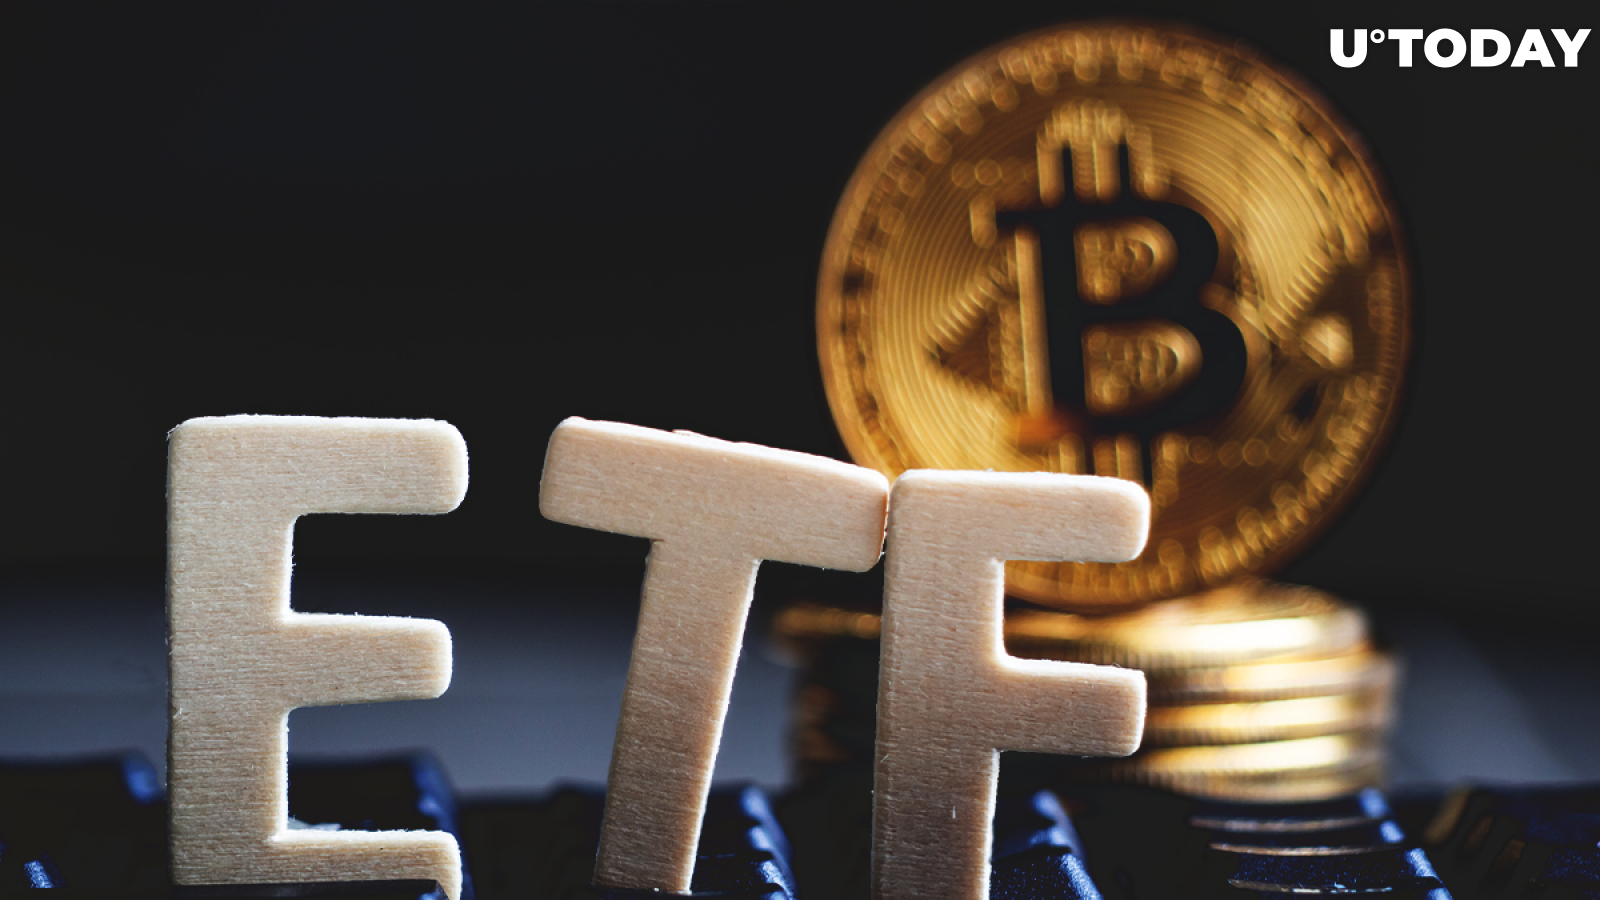 Bitcoin Miners ETF Leads Q1 Performance With Staggering 107% Growth